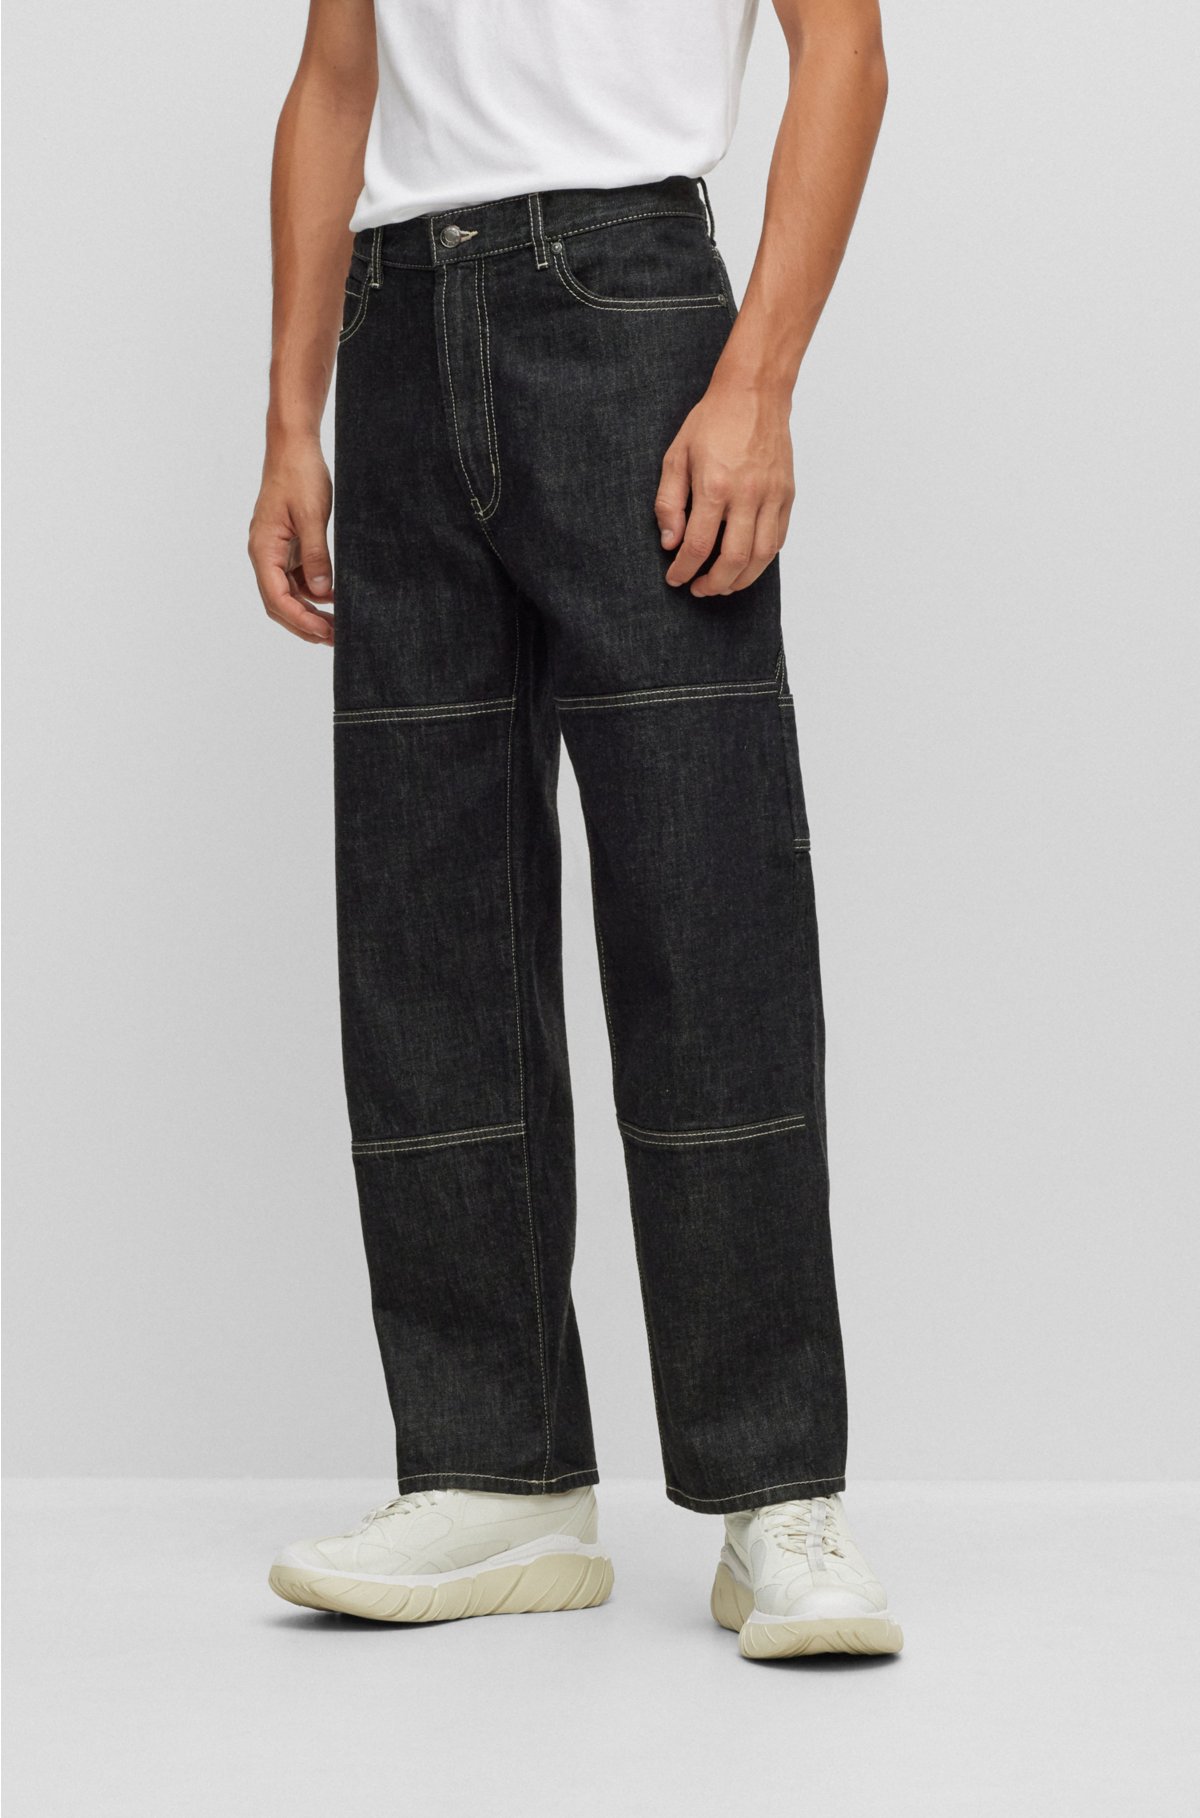 EIGHTYFIVE ZIPPED CARPENTER JEANS - Relaxed fit jeans - black